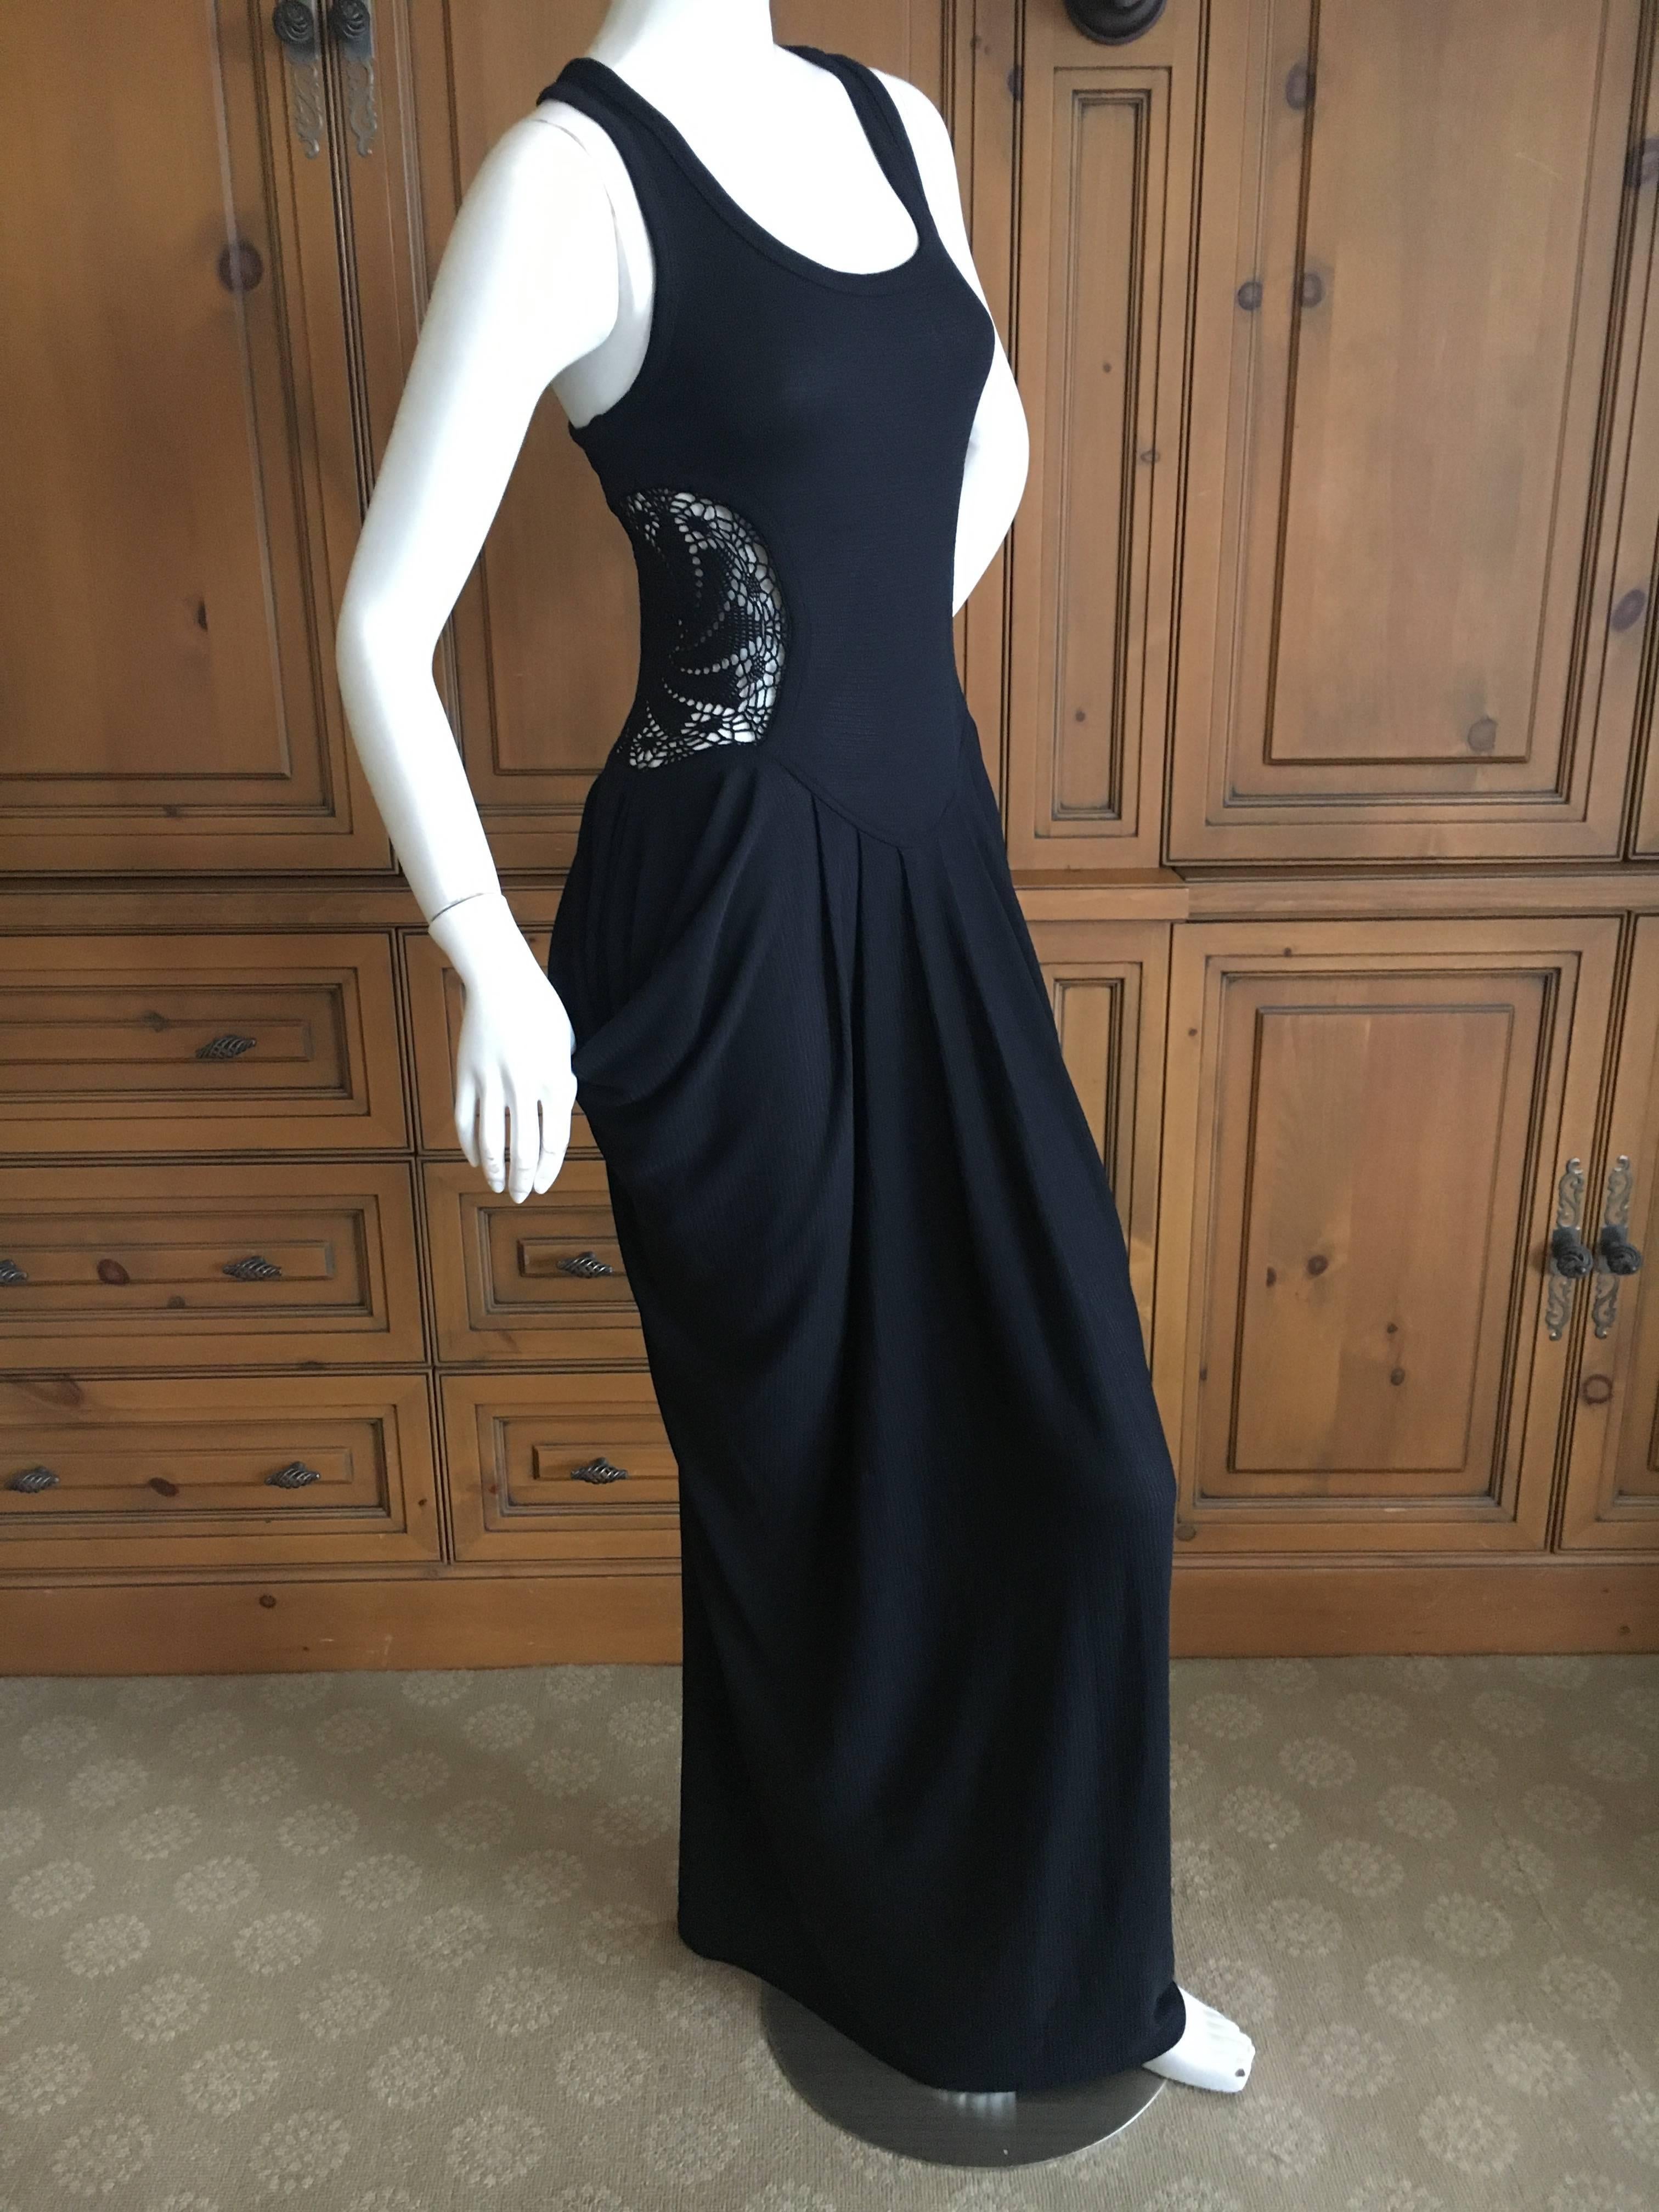 Jean Paul Gaultier Femme Black Tank Dress with Star Catcher Mandala Insert  In New Condition For Sale In Cloverdale, CA